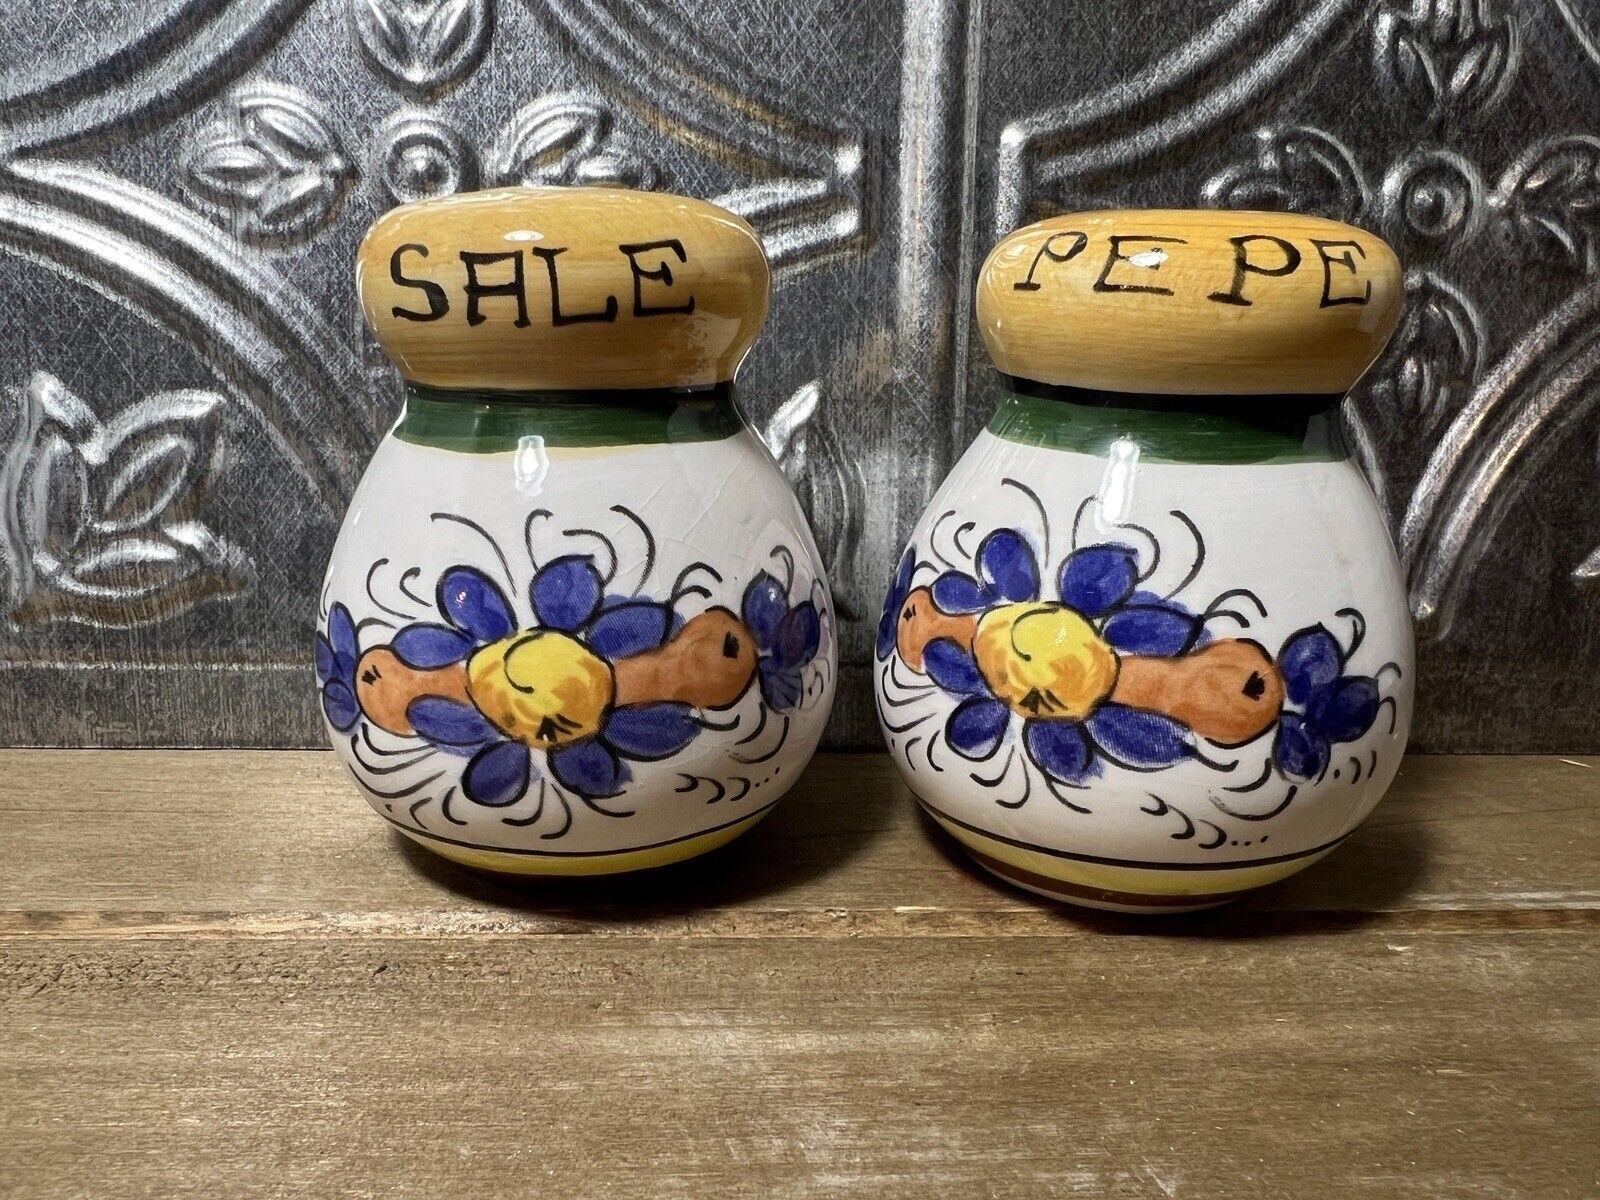 Vintage Italian Salt & Pepper Shakers SALE PEPE  Hand Painted Made In Thailand